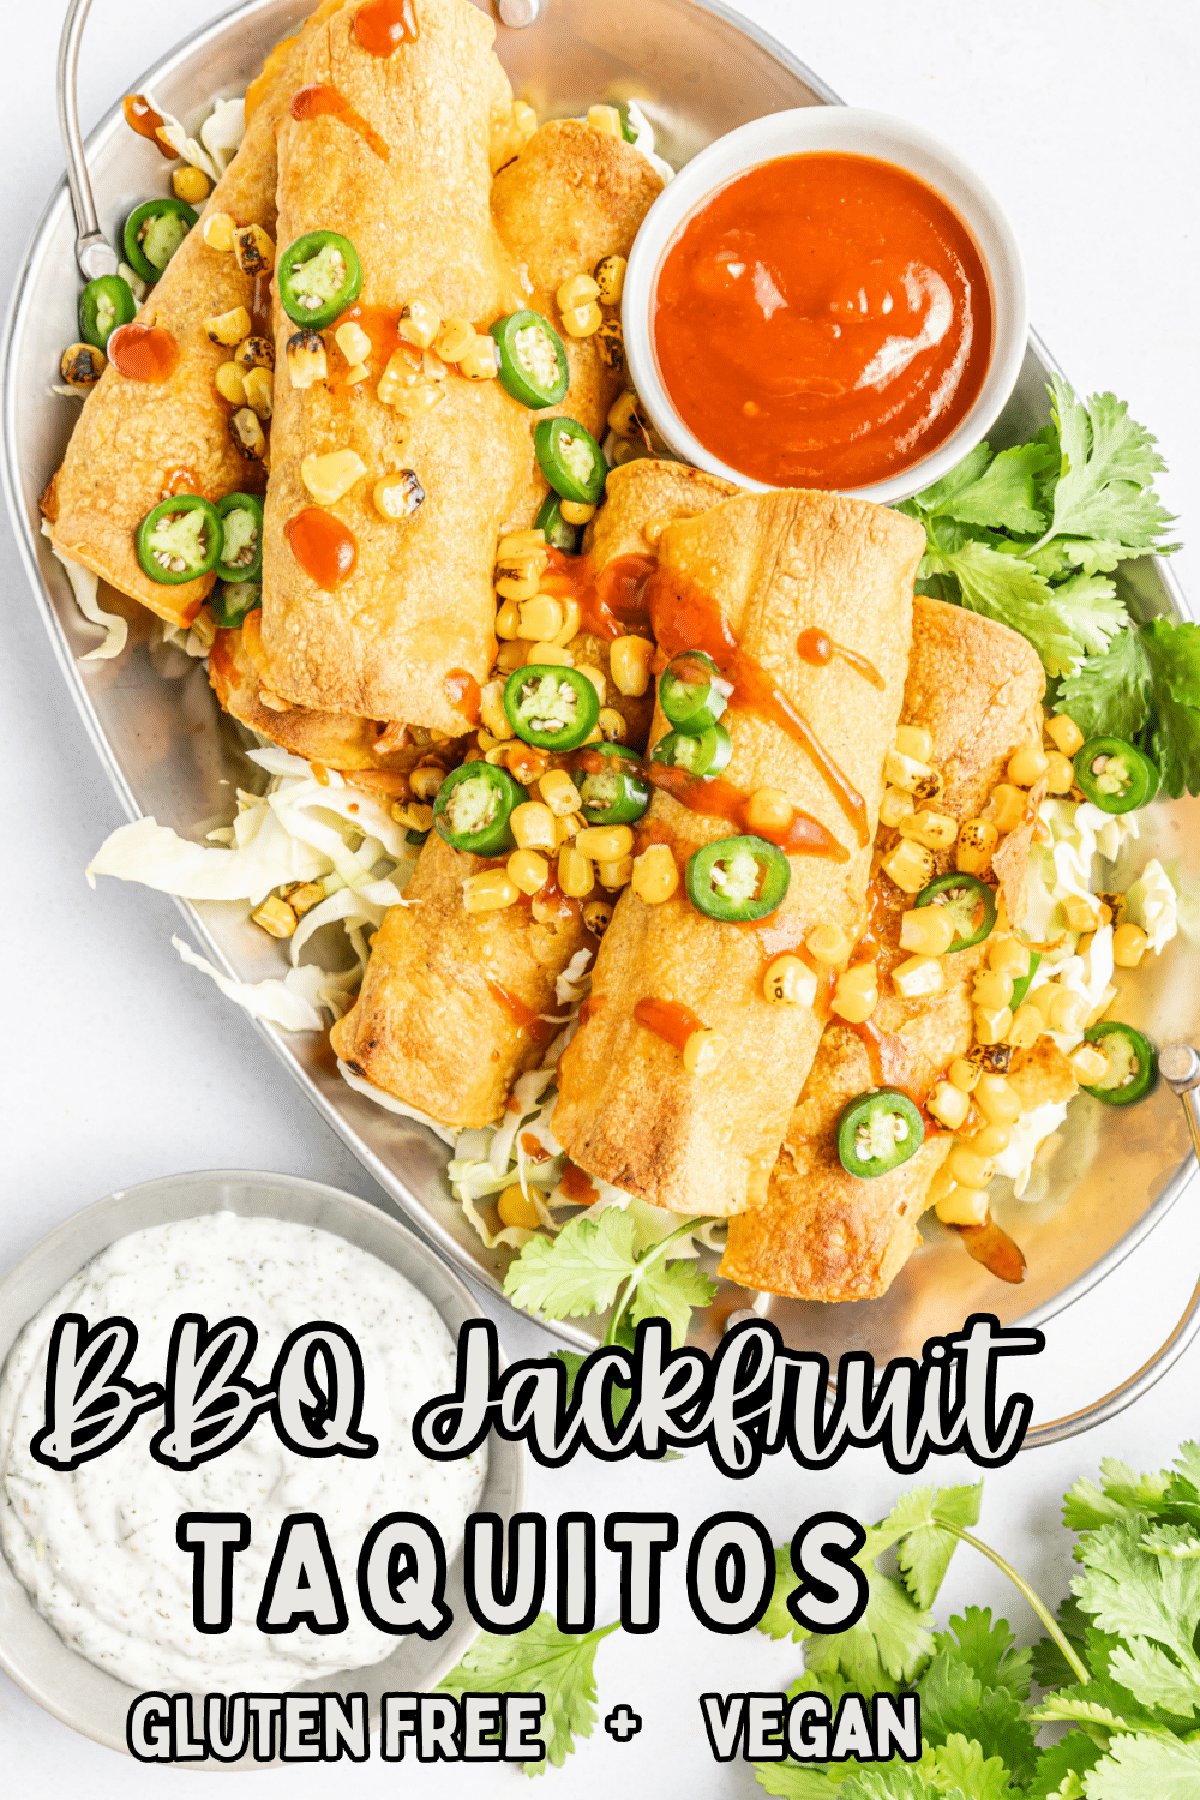 Overhead view of BBQ jackfruit taquitos piled onto a silver platter, topped with fire roasted corn, jalapeno slices, cilantro, and a drizzle of BBQ sauce. Small bowls of BBQ sauce and ranch dressing on the side.